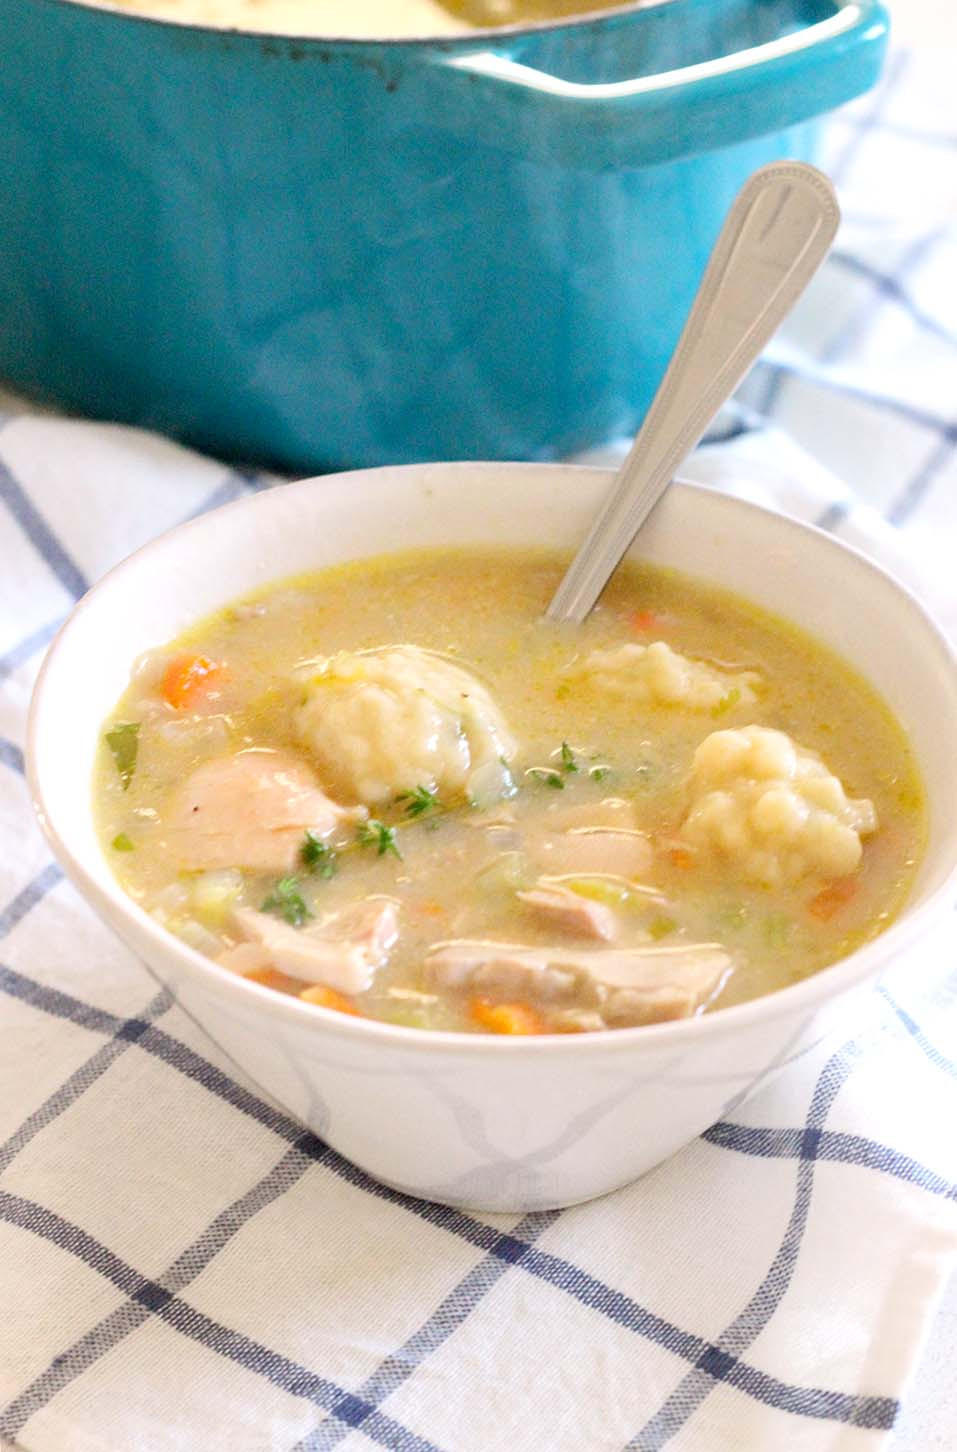 Easy Chicken And Dumplings
 Easy Chicken and Dumplings from Scratch